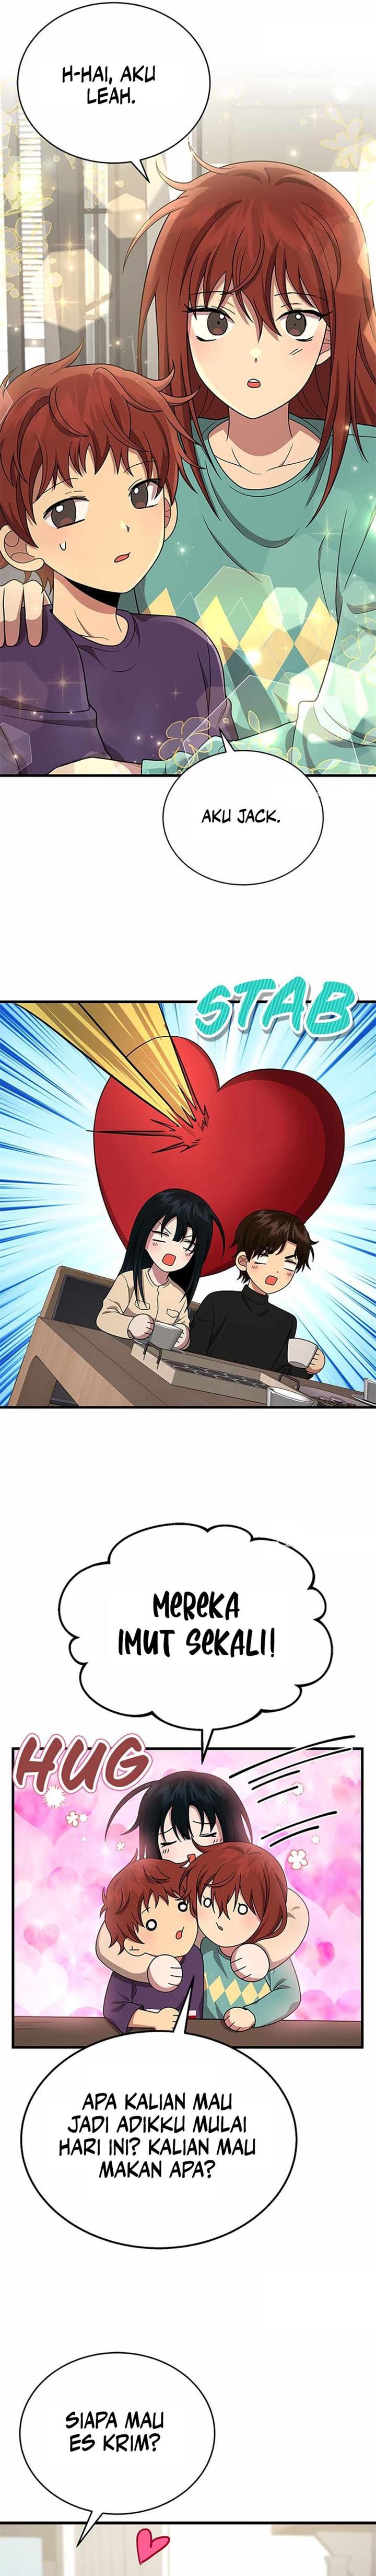 Heir of Mythical Heroes Chapter 43